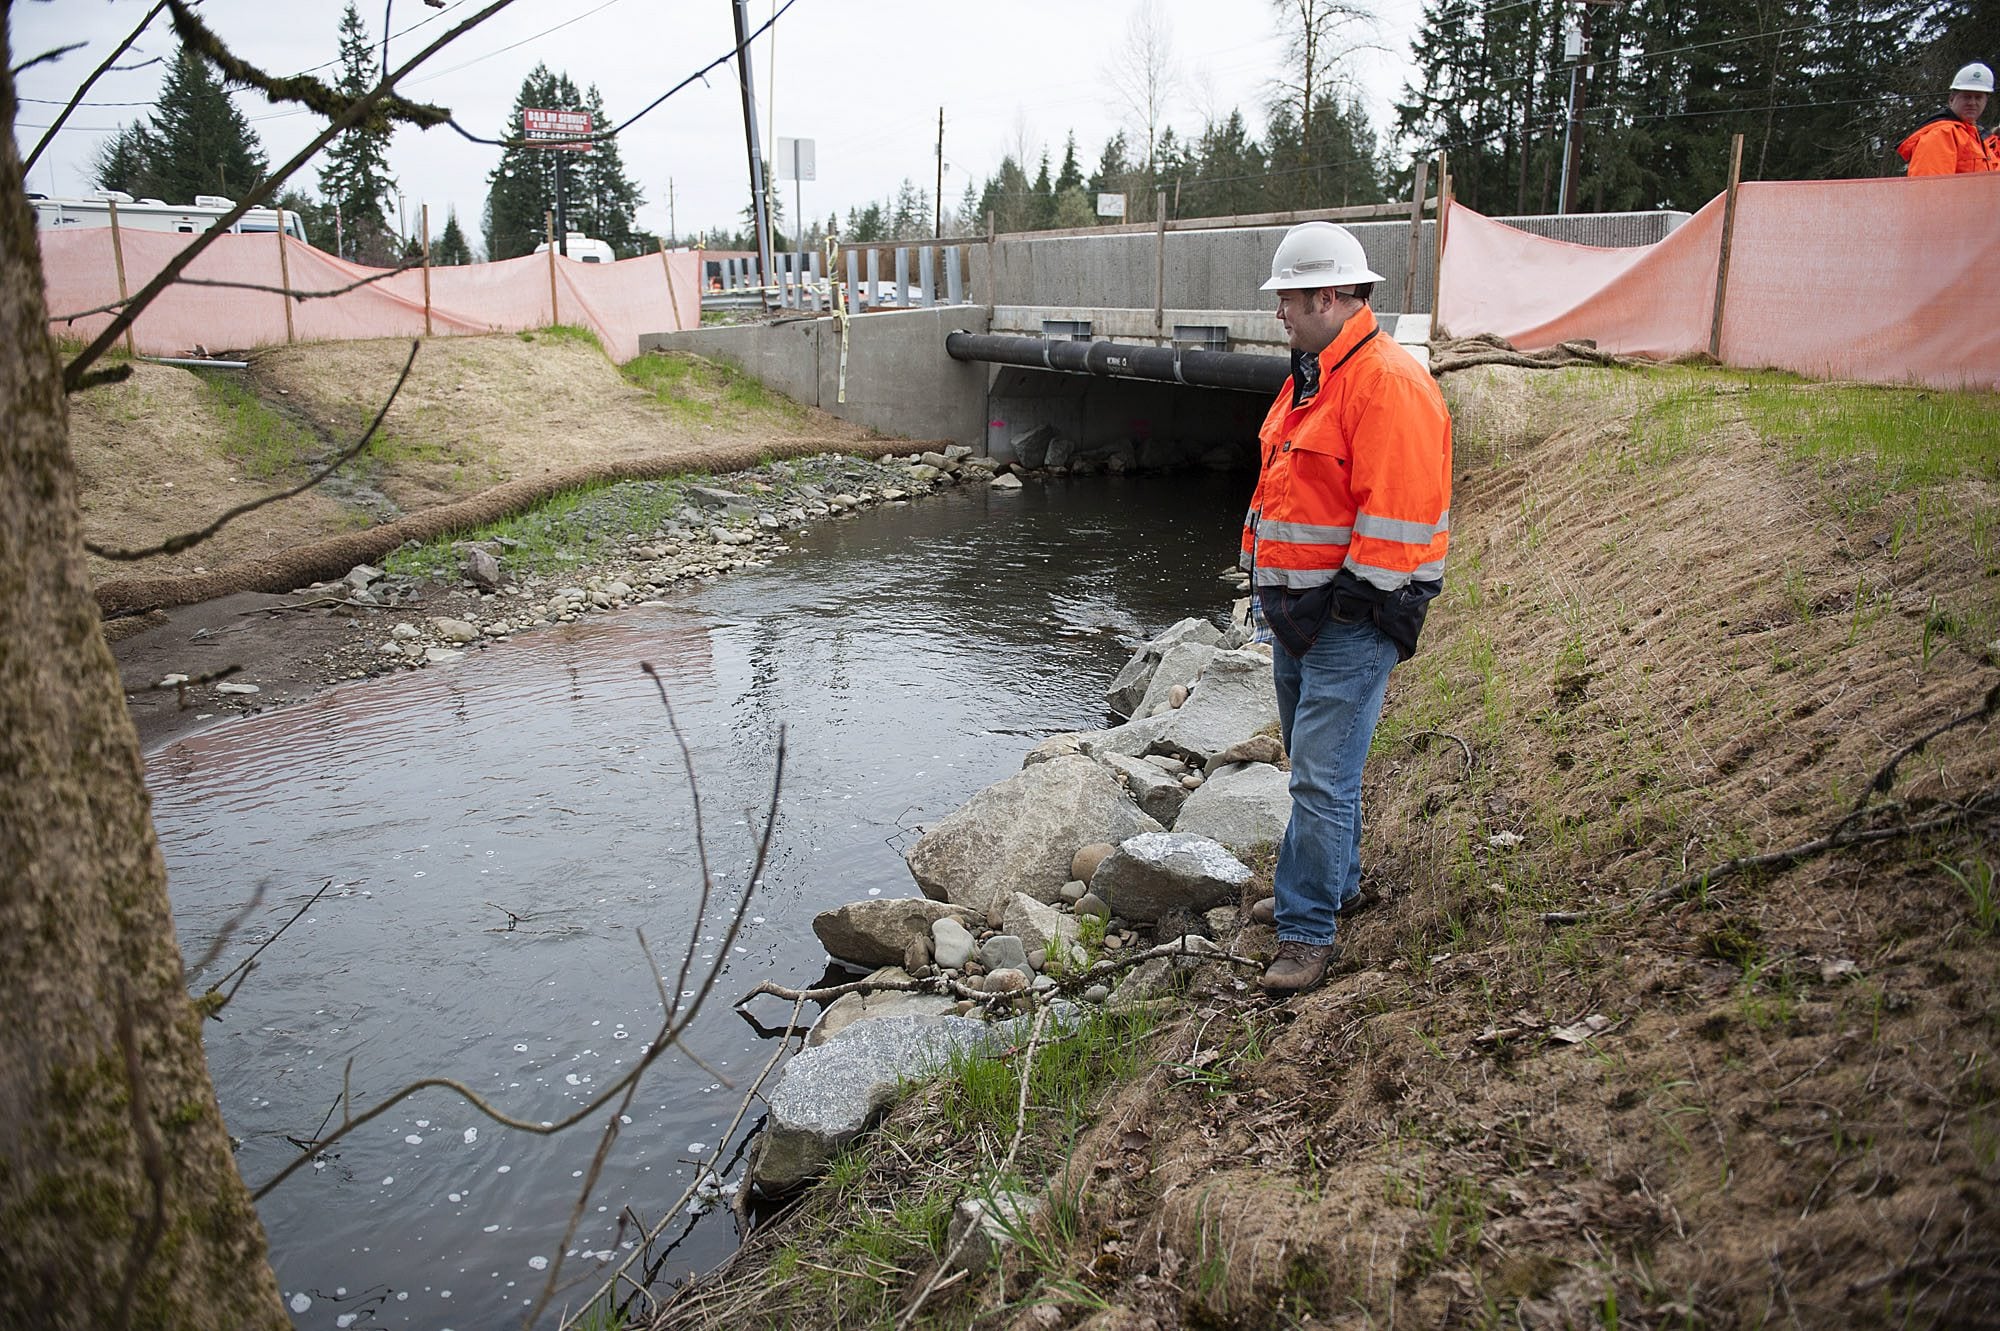 Kevin Workman of the Washington State Department of Transportation looks over a recently constructed culvert at Mill Creek along state Highway 502 near Battle Ground on Monday. Modern culverts are designed and installed to mesh with all life phases of migratory fish.